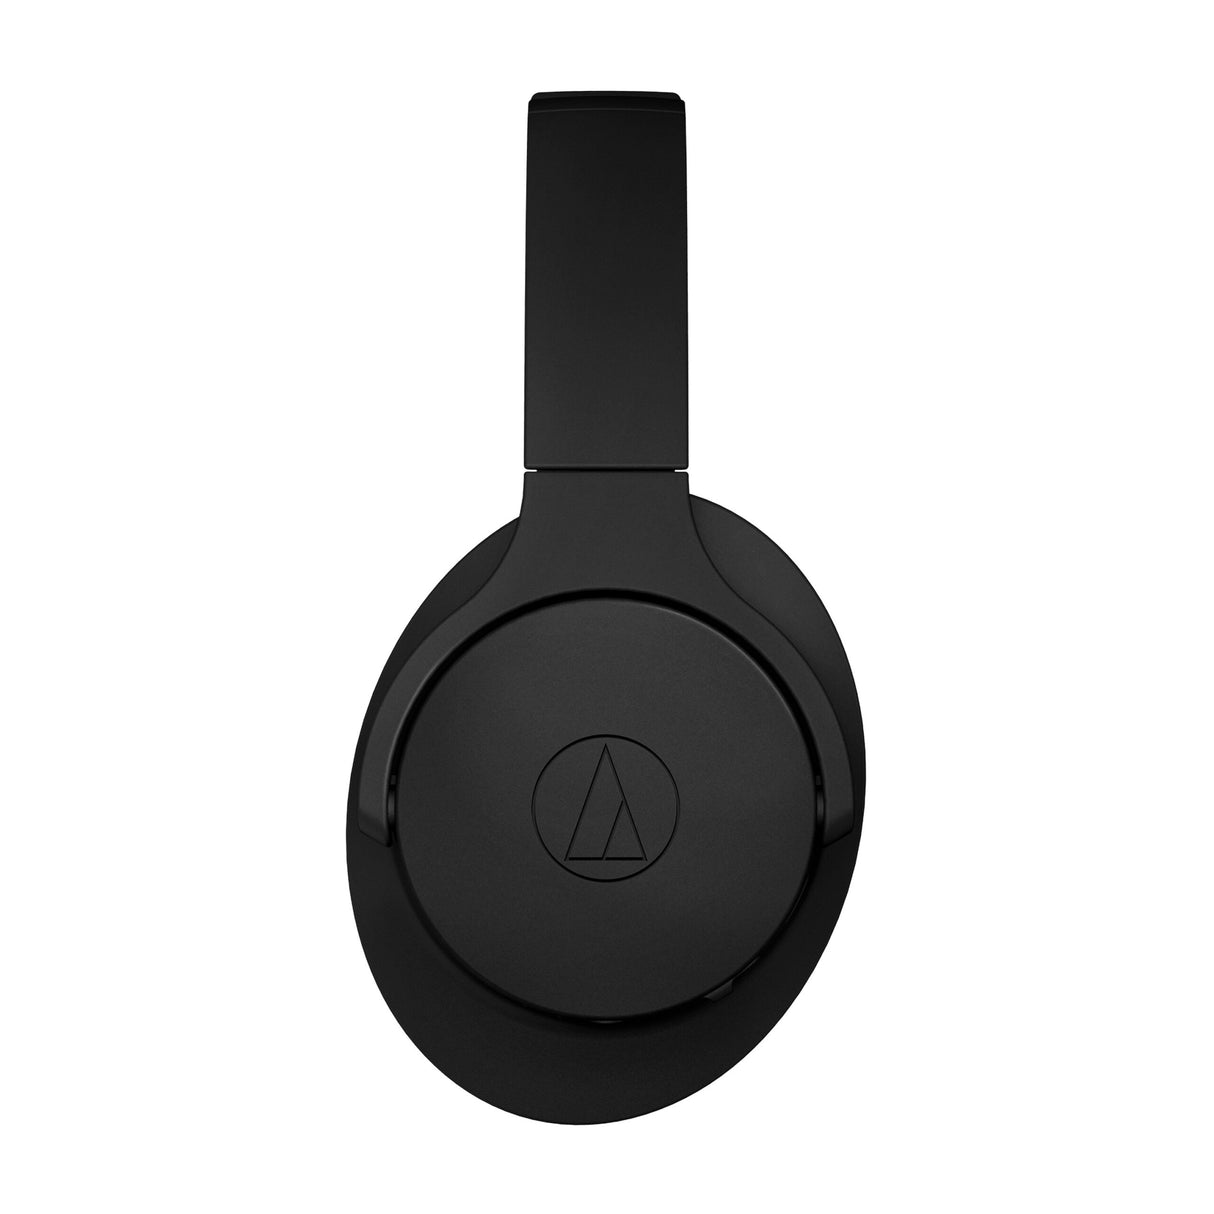 Audio-Technica ATH-ANC700BTBK Quietpoint Over-Ear Wireless Headphones with Active Noise Cancelling